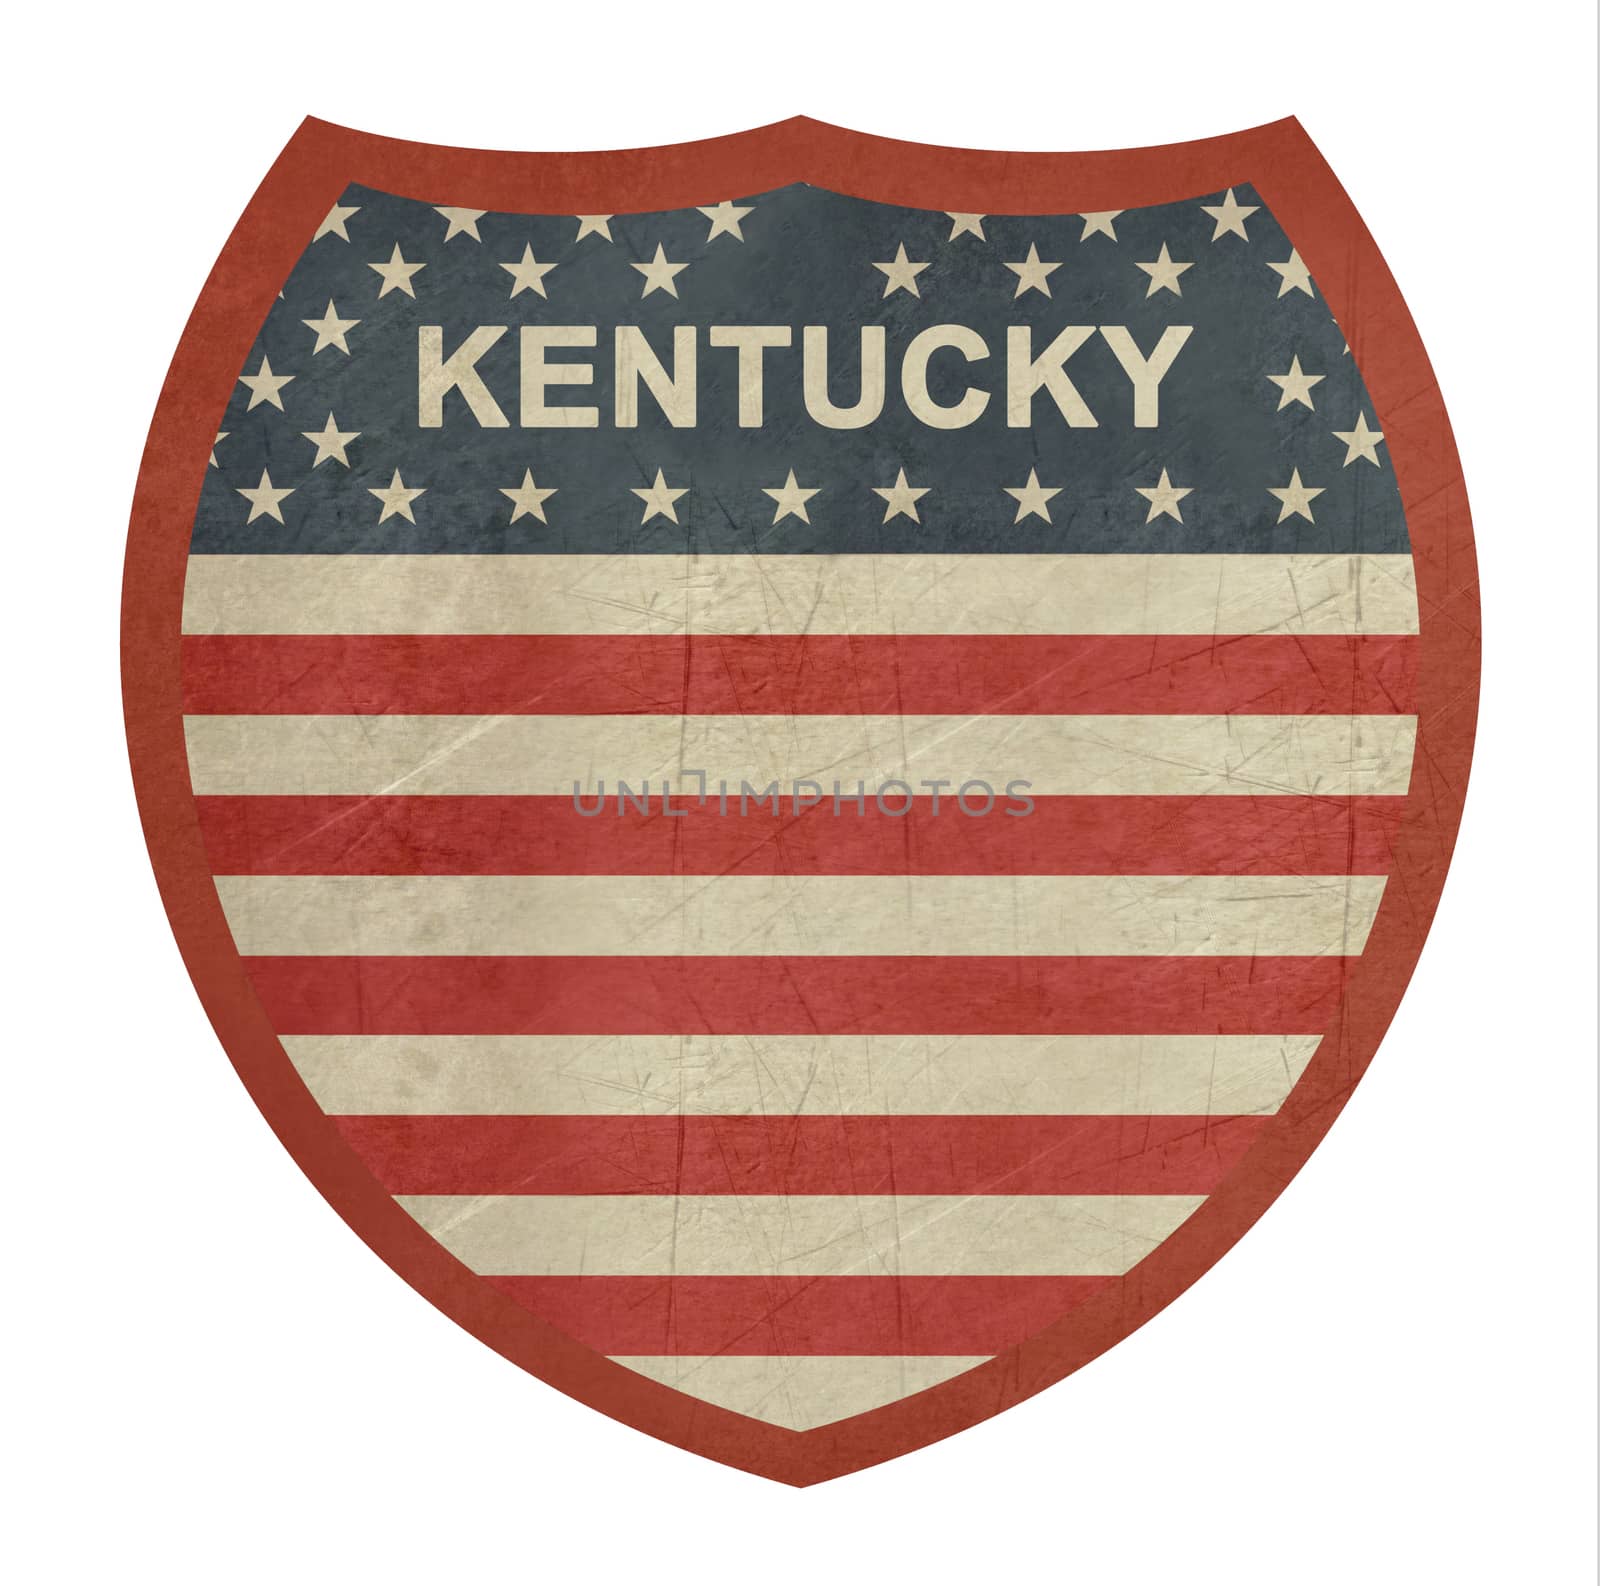 Grunge Kentucky American interstate highway sign isolated on a white background.